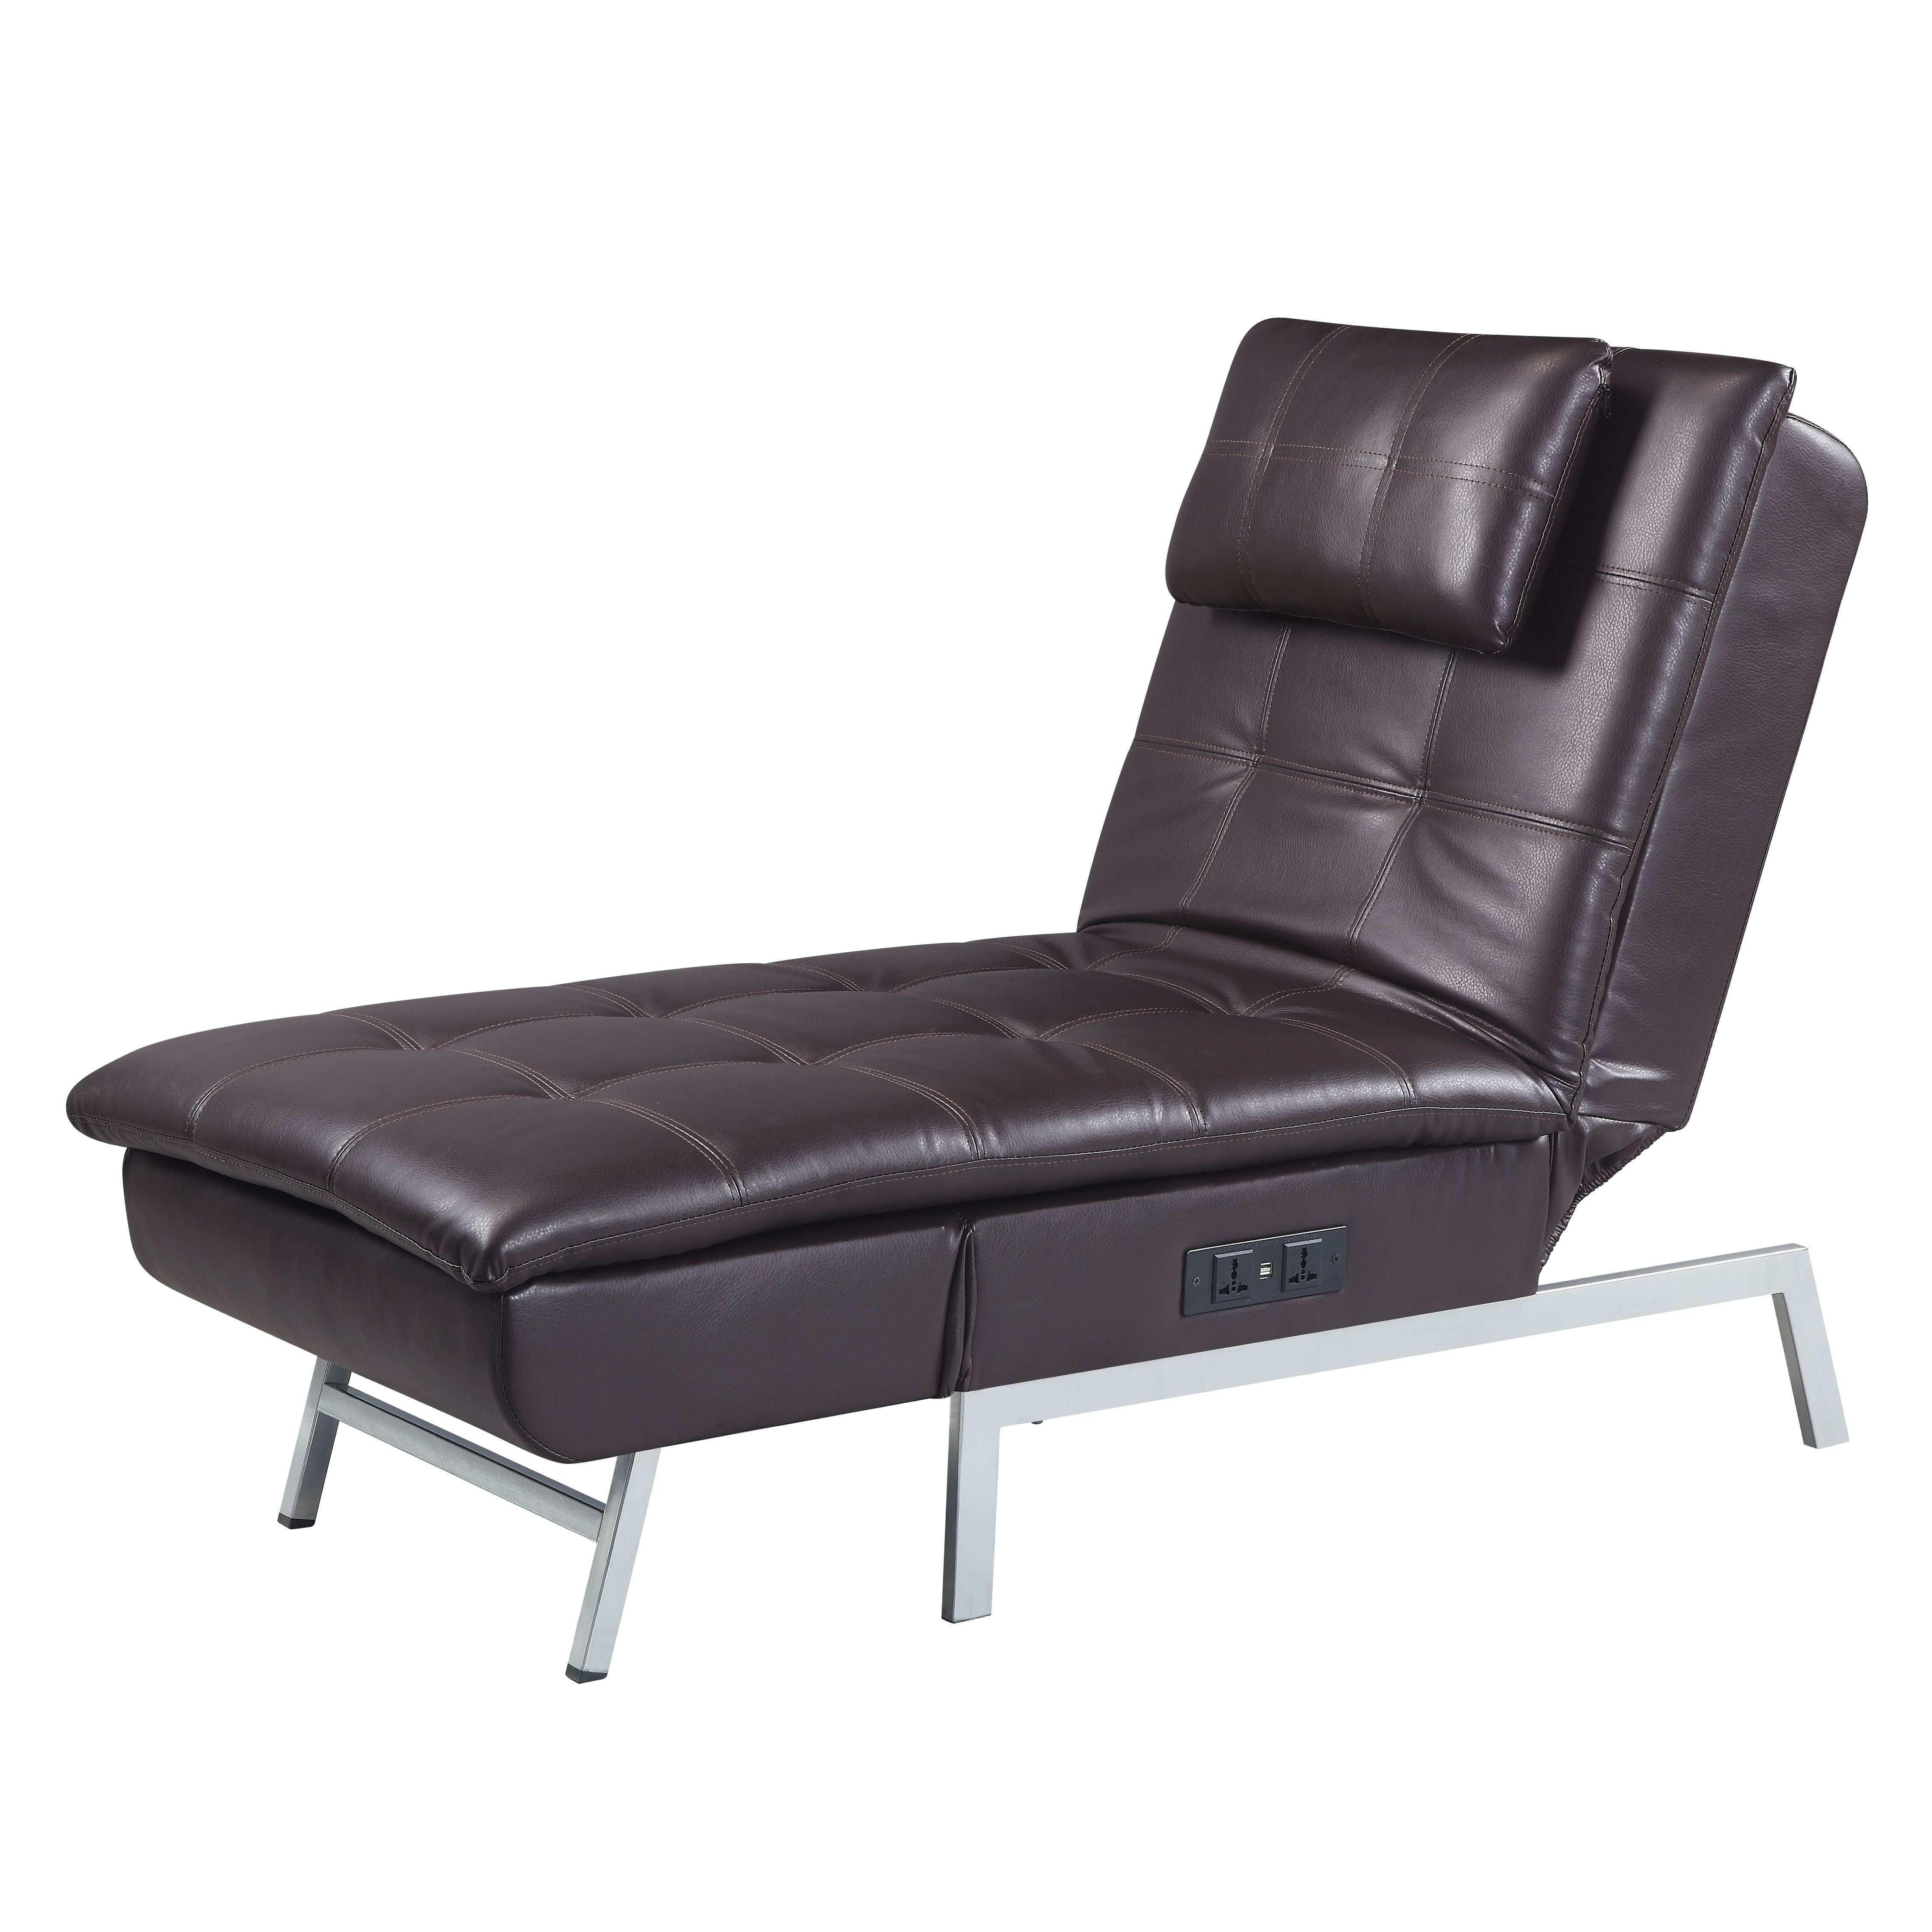 Lucic Chaise Lounge W/Pillow & Usb